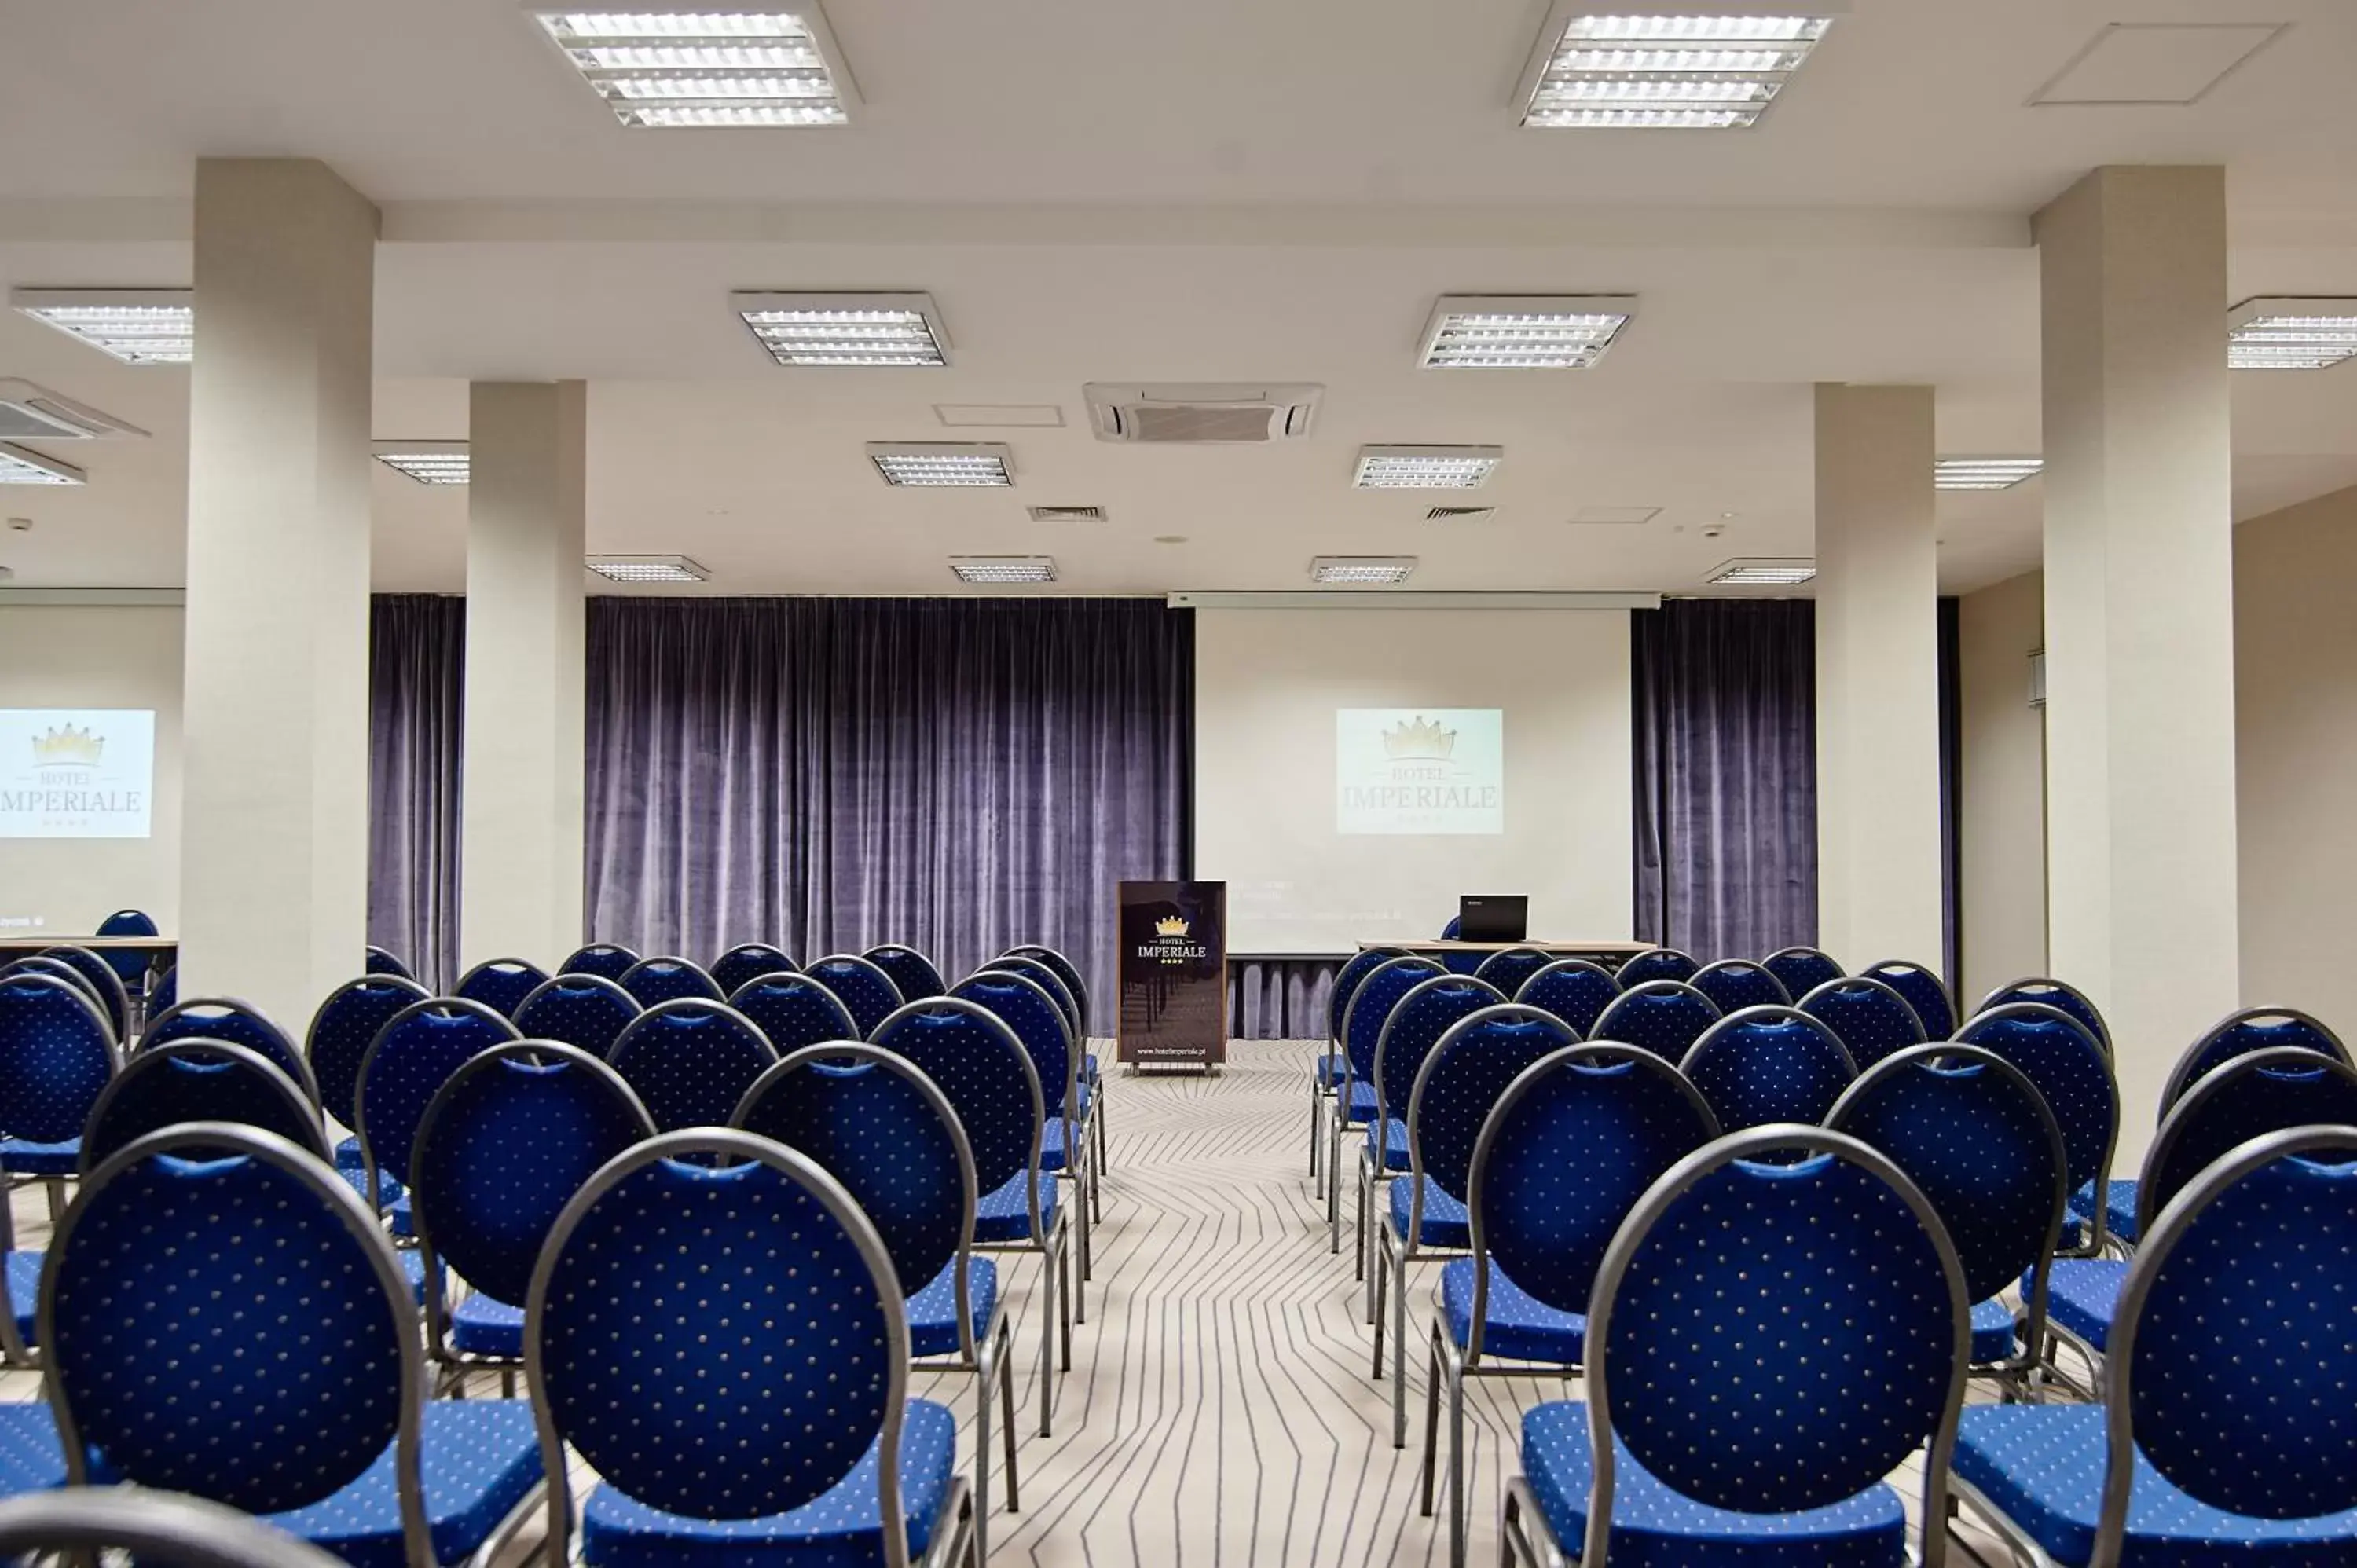 Meeting/conference room in Hotel Imperiale